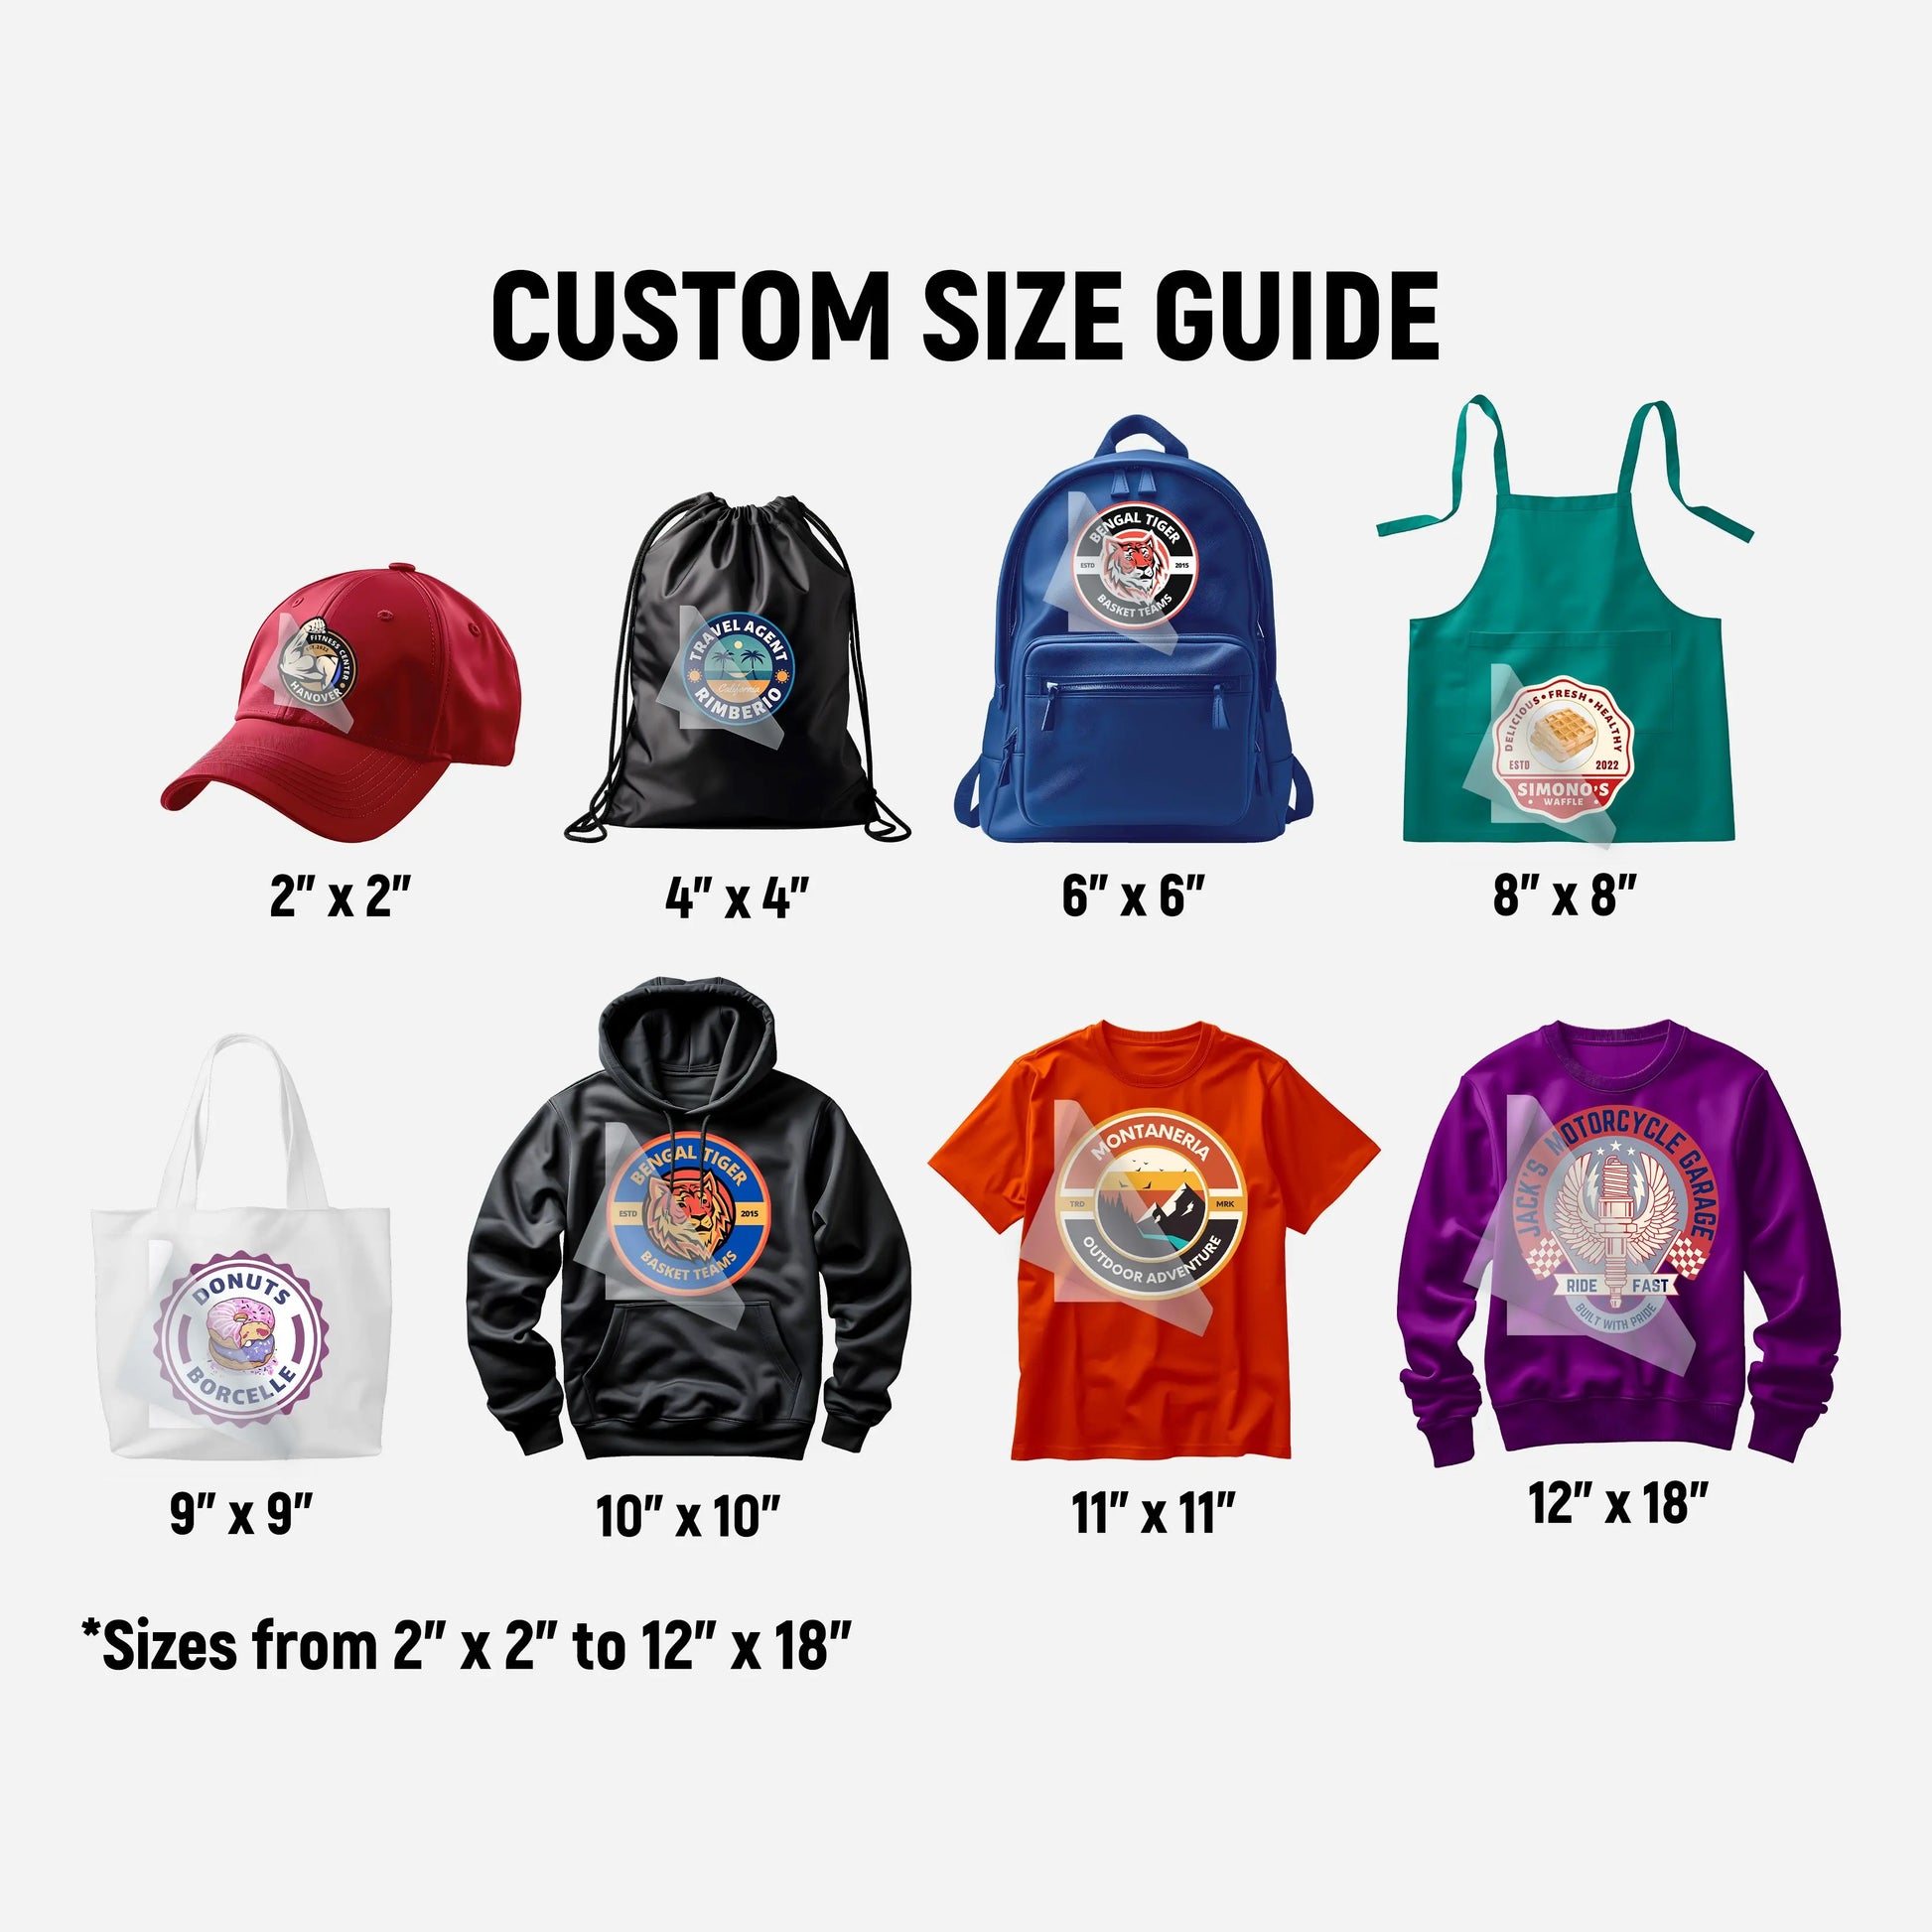 Sam's DTF Transfers custom size guide showing various DTF print sizes ranging from 2x2 to 12x18 inches on products including caps, bags, aprons, t-shirts, and hoodies.